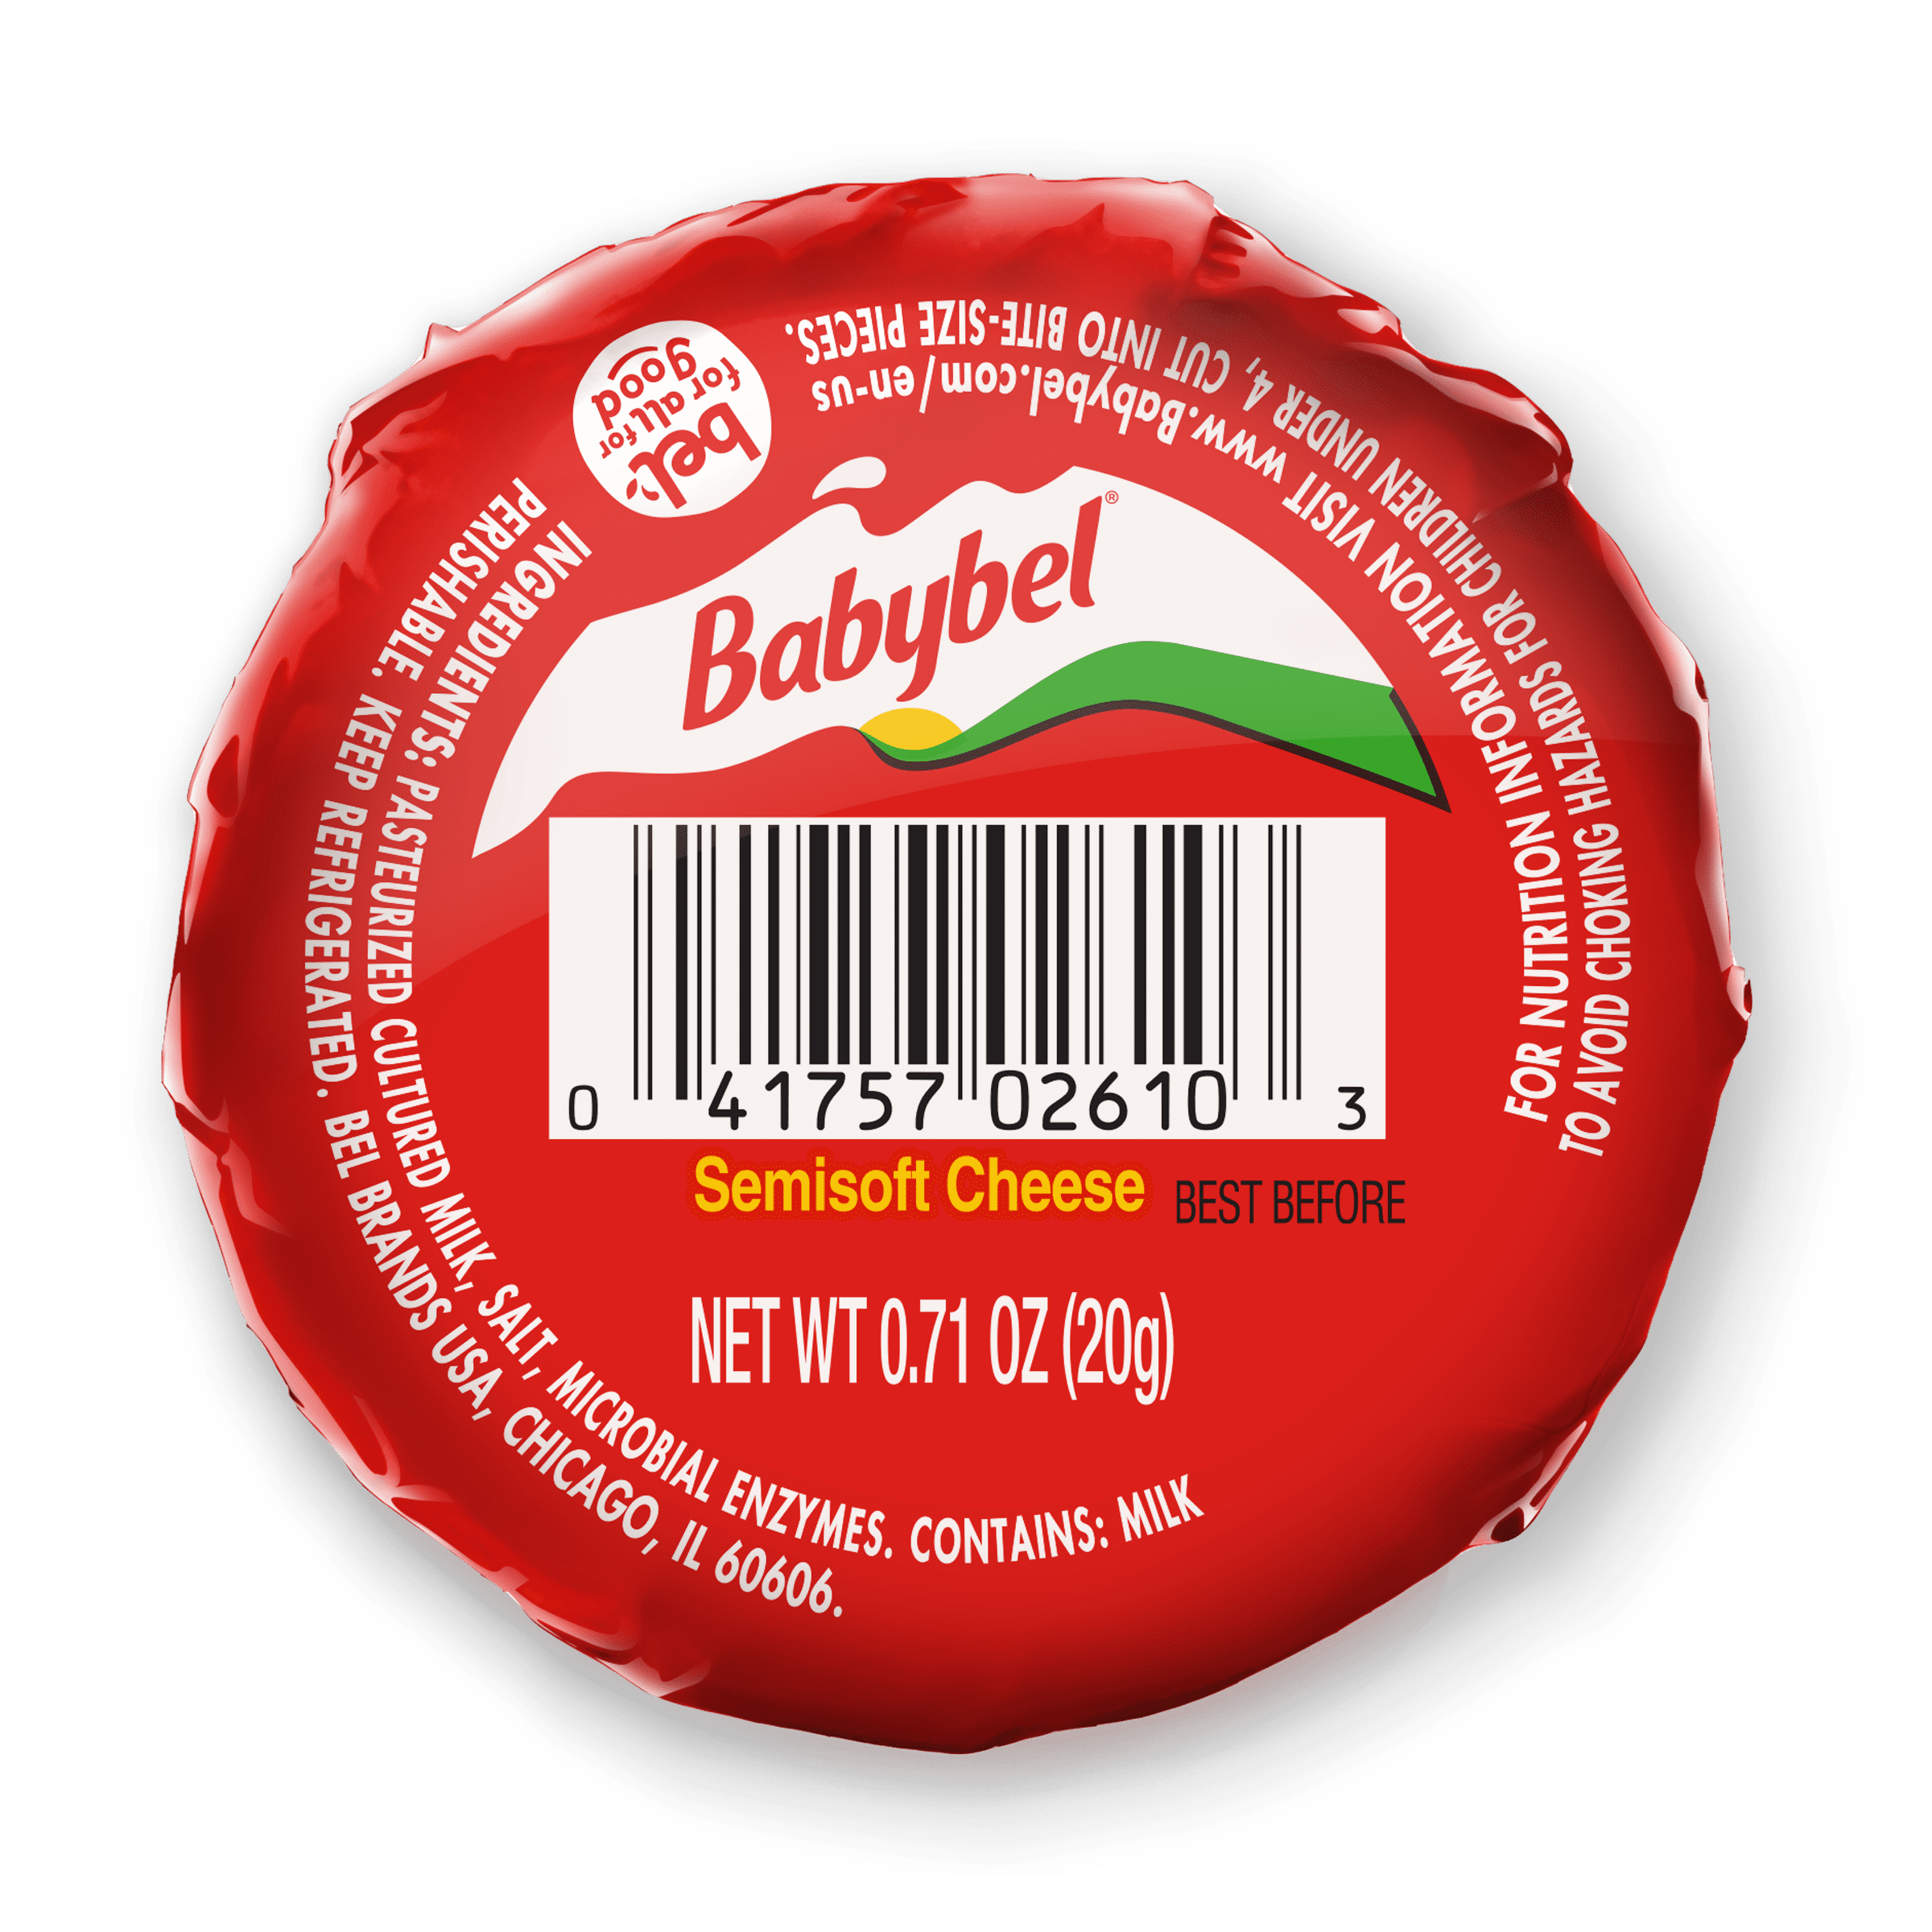 Babybel Original Flavored Snack Cheese, 8.5 oz, 12 Count Net. Refrigerated  